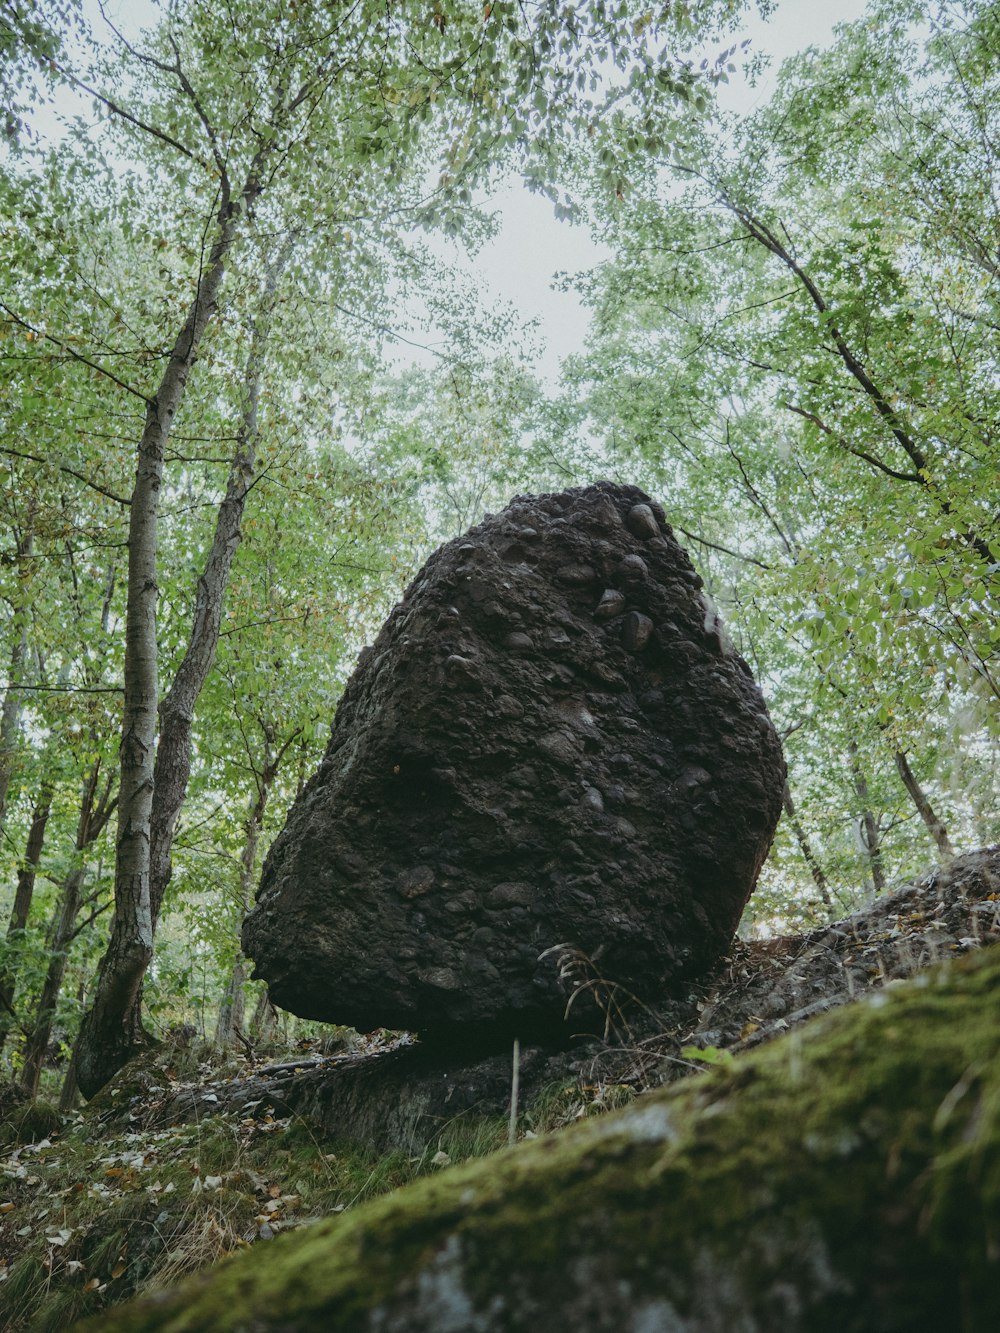 brown rock formation surrounded by green trees during daytime